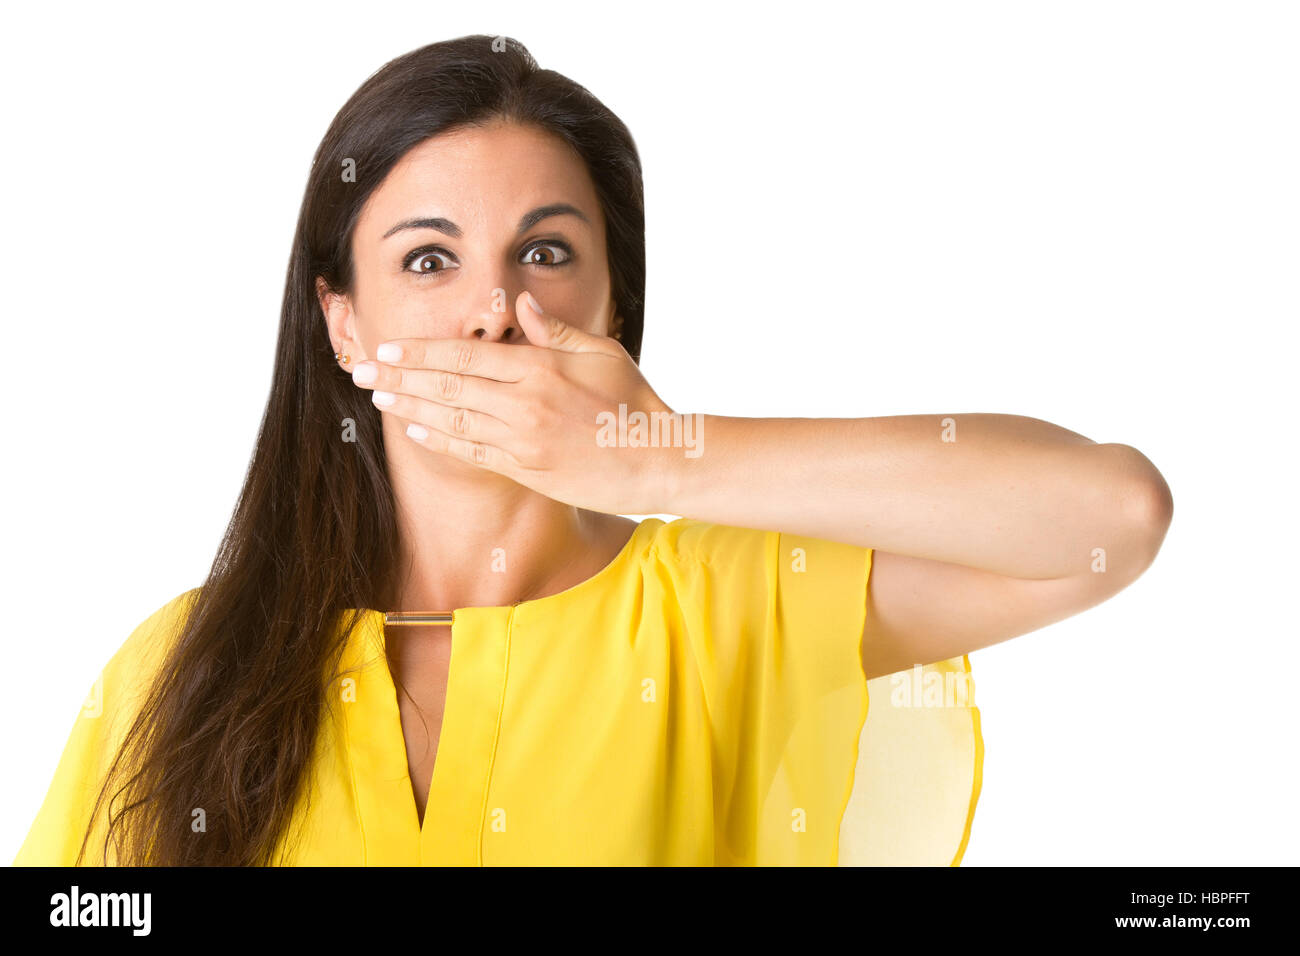 Female Covering Her mouth Stock Photo